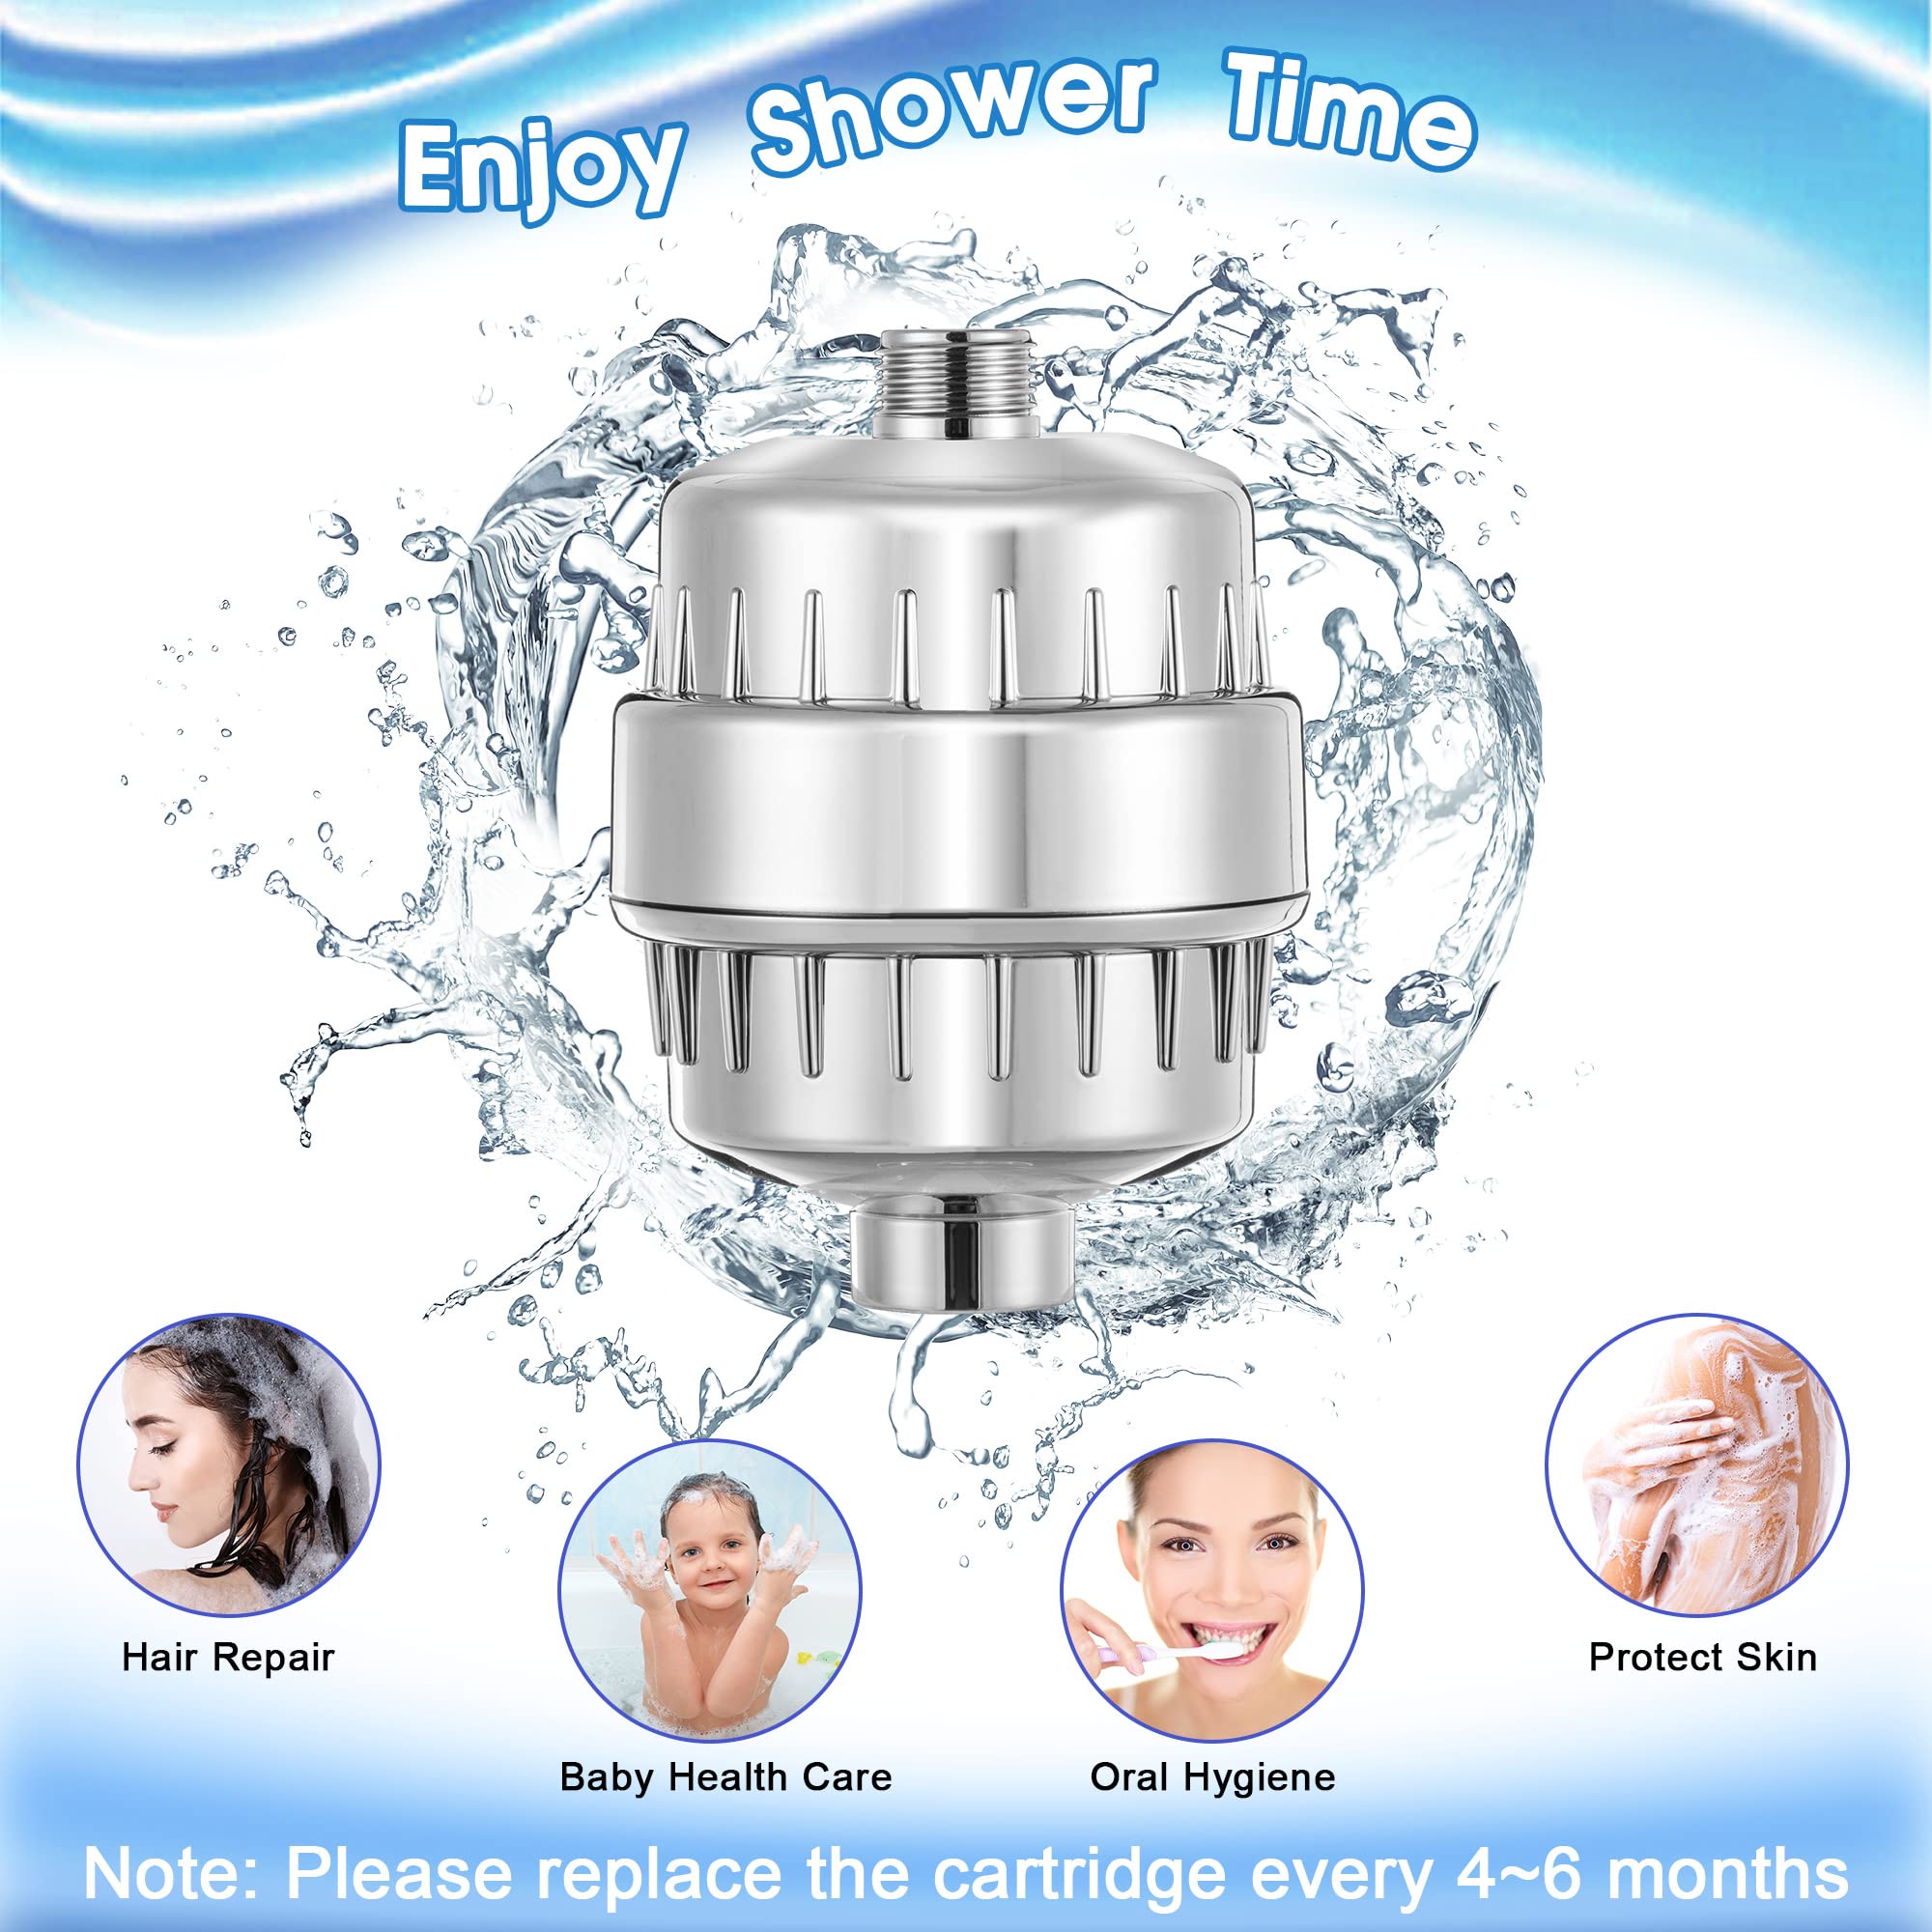 Enhon 20 Stage Shower Head Filters for Hard Water, 2 Pcs Shower Water Softener Filters with 4 Replacement Cartridges to Remove Chlorine Fluoride Heavy Metals for Dry Skin, Hair, Eczema